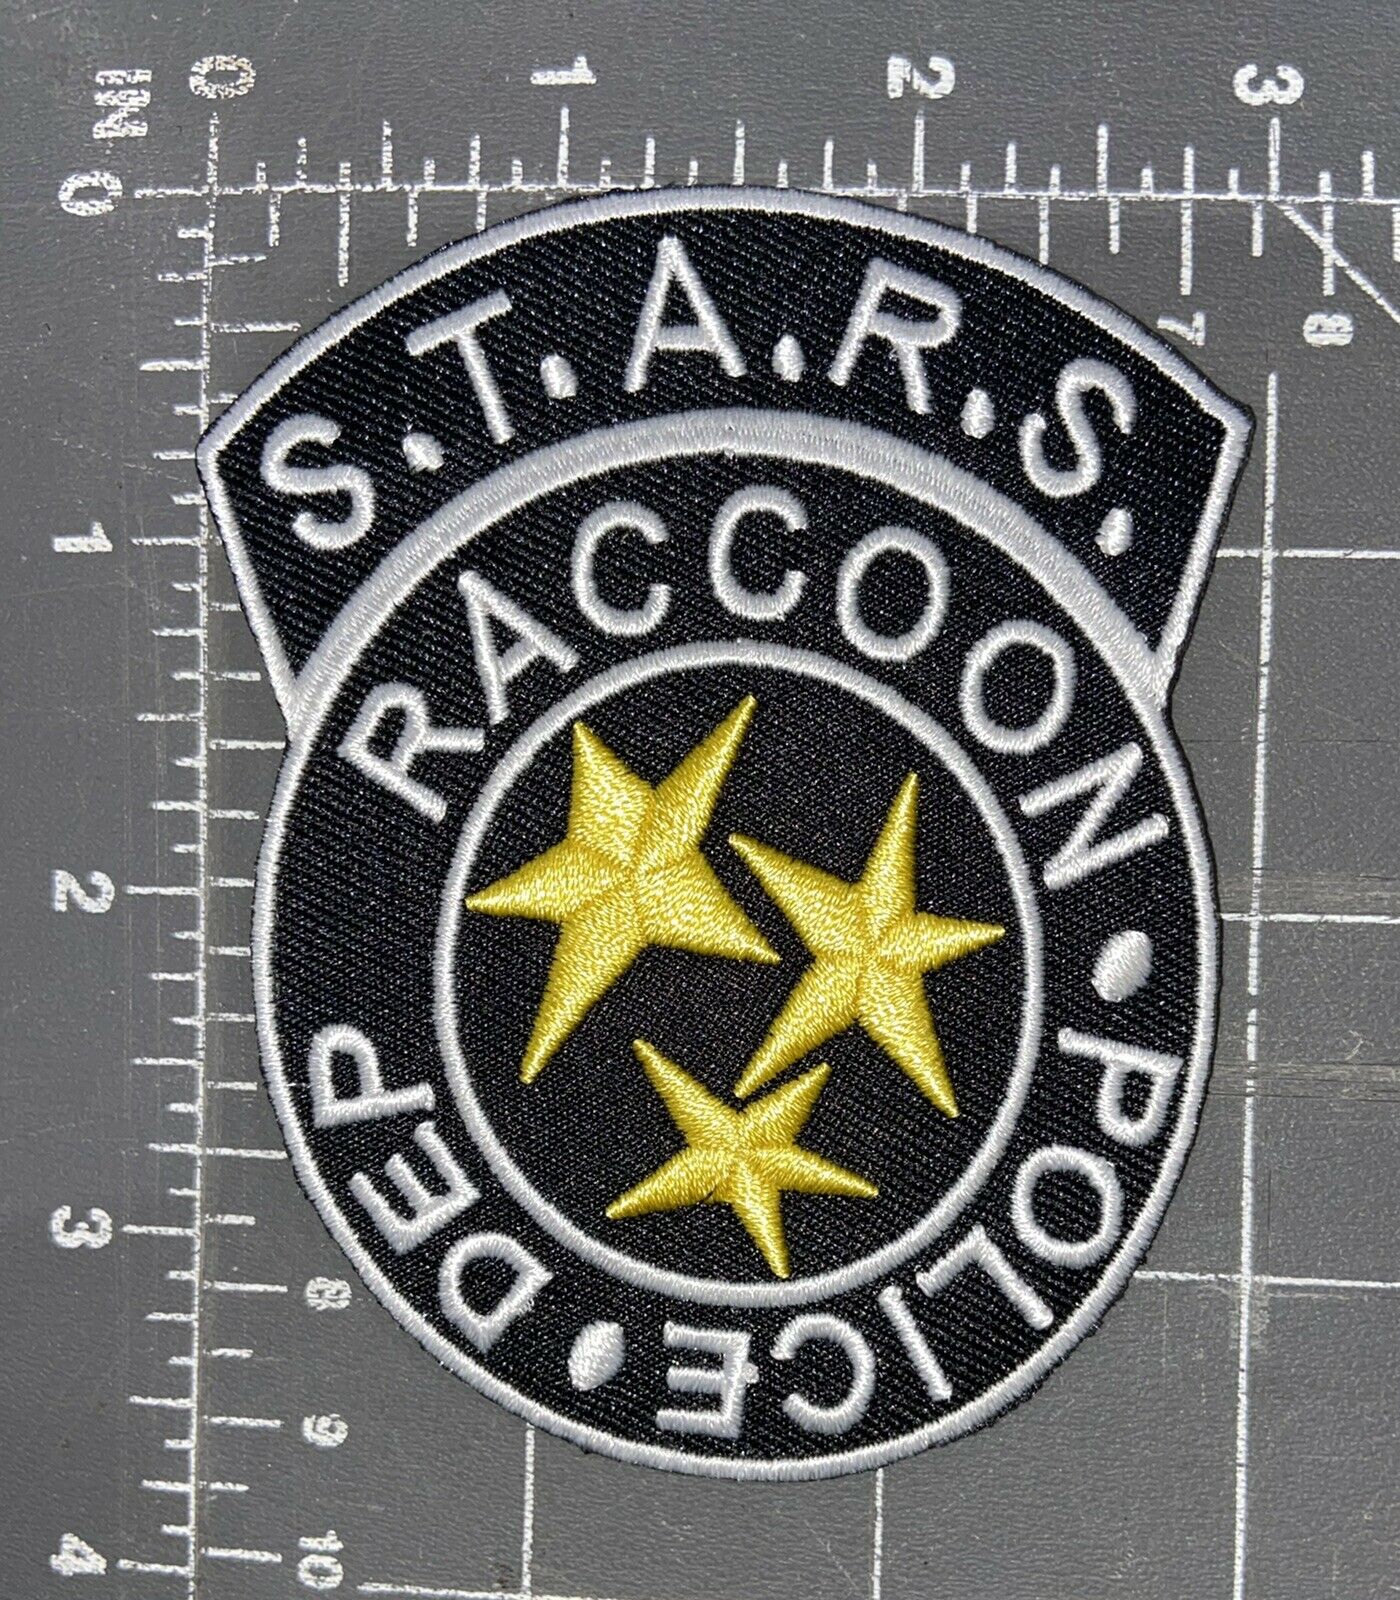 Raccoon Police Department S.t.a.r.s. Patch Stars Rpd R.p.d. Resident Evil City